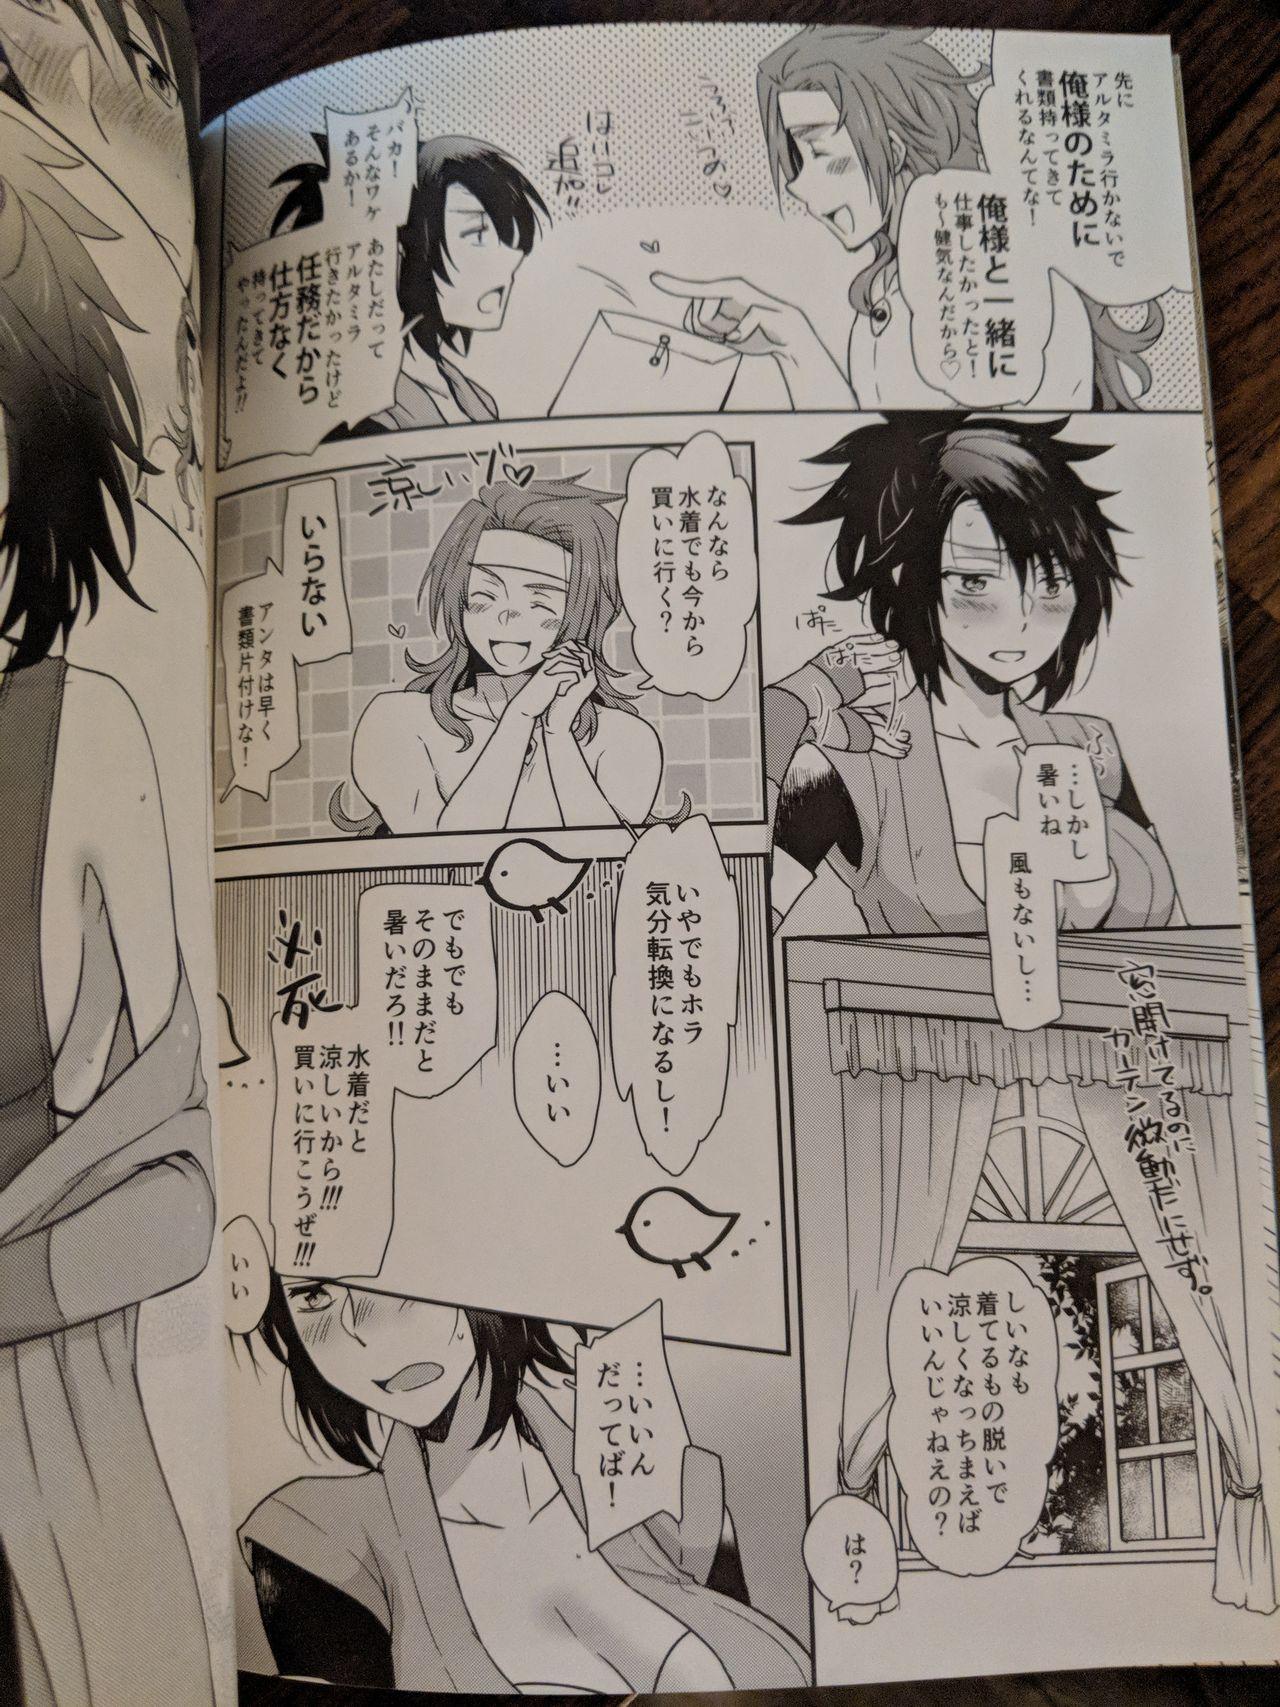 Point Of View 彼女が水着にきがえたら - Tales of symphonia Horny - Page 5